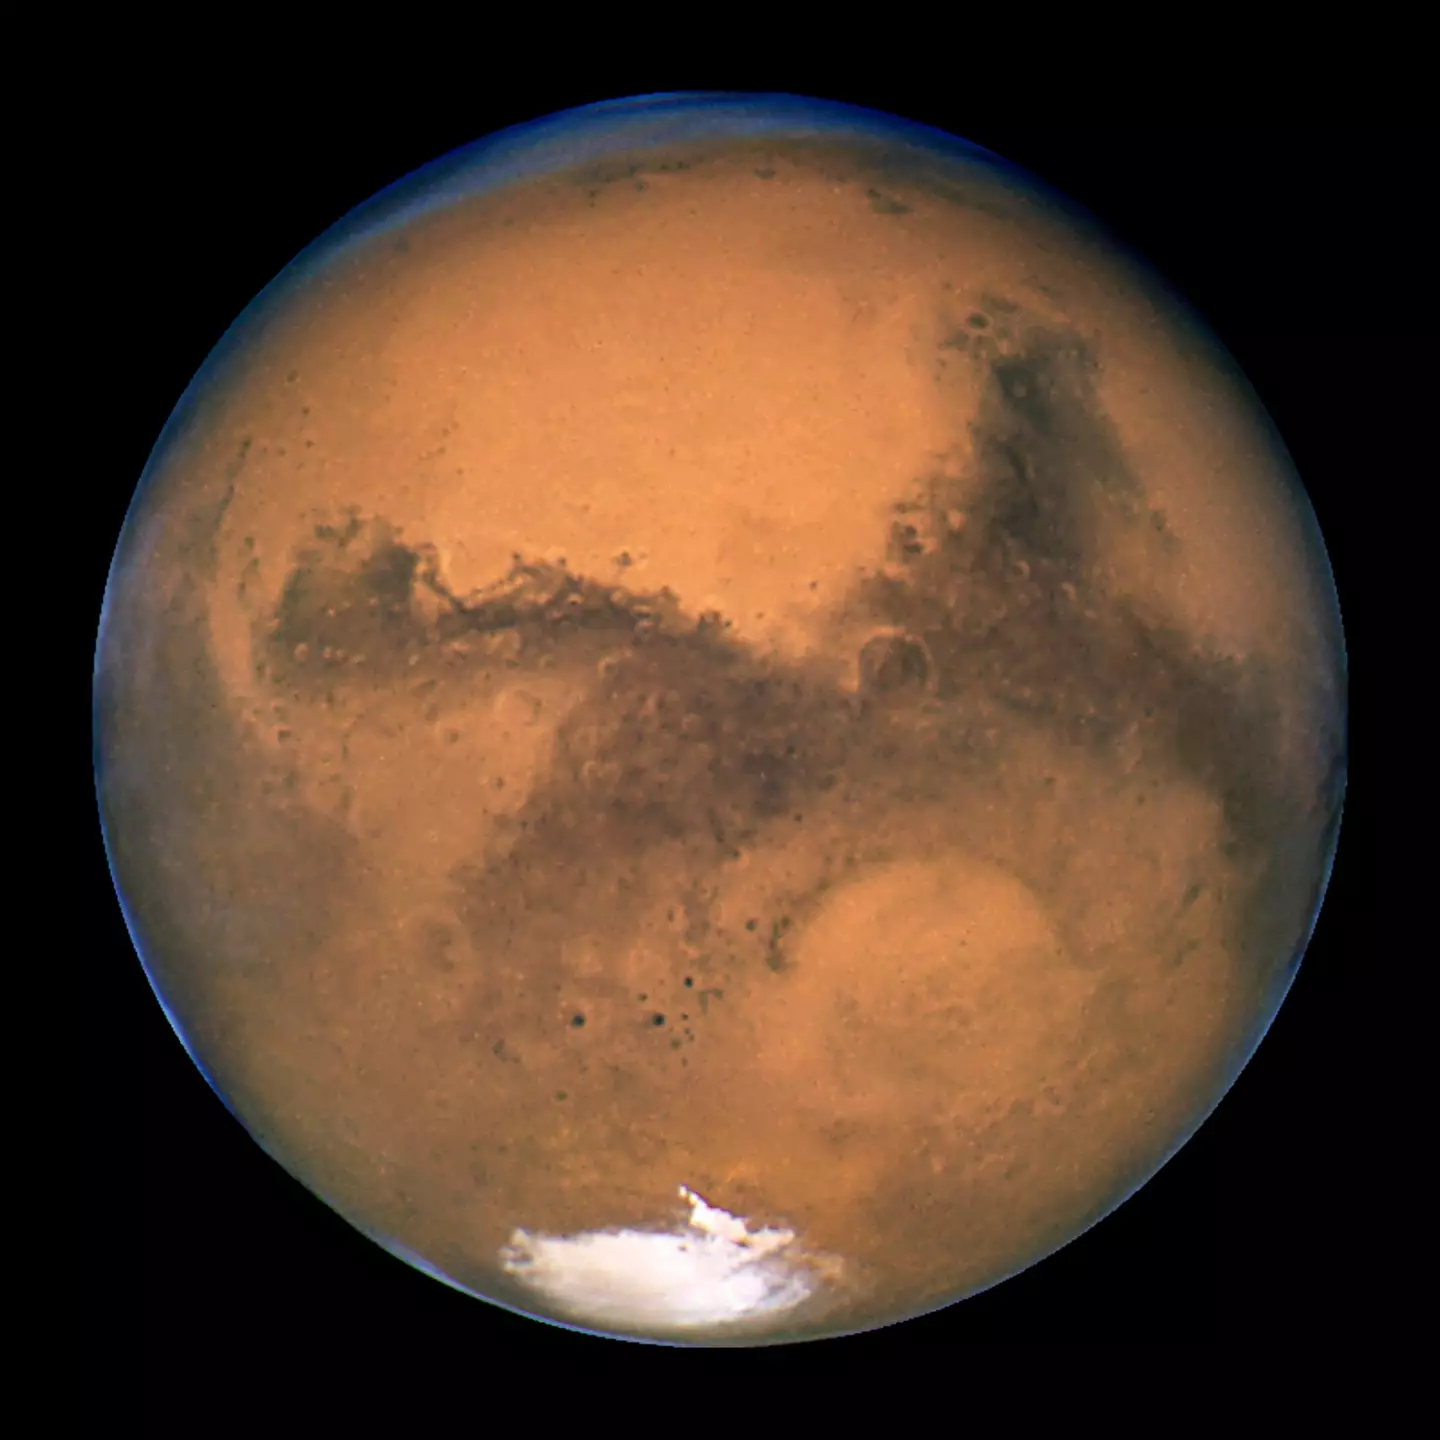 Humanity could land on the red planet by the late 2030s.